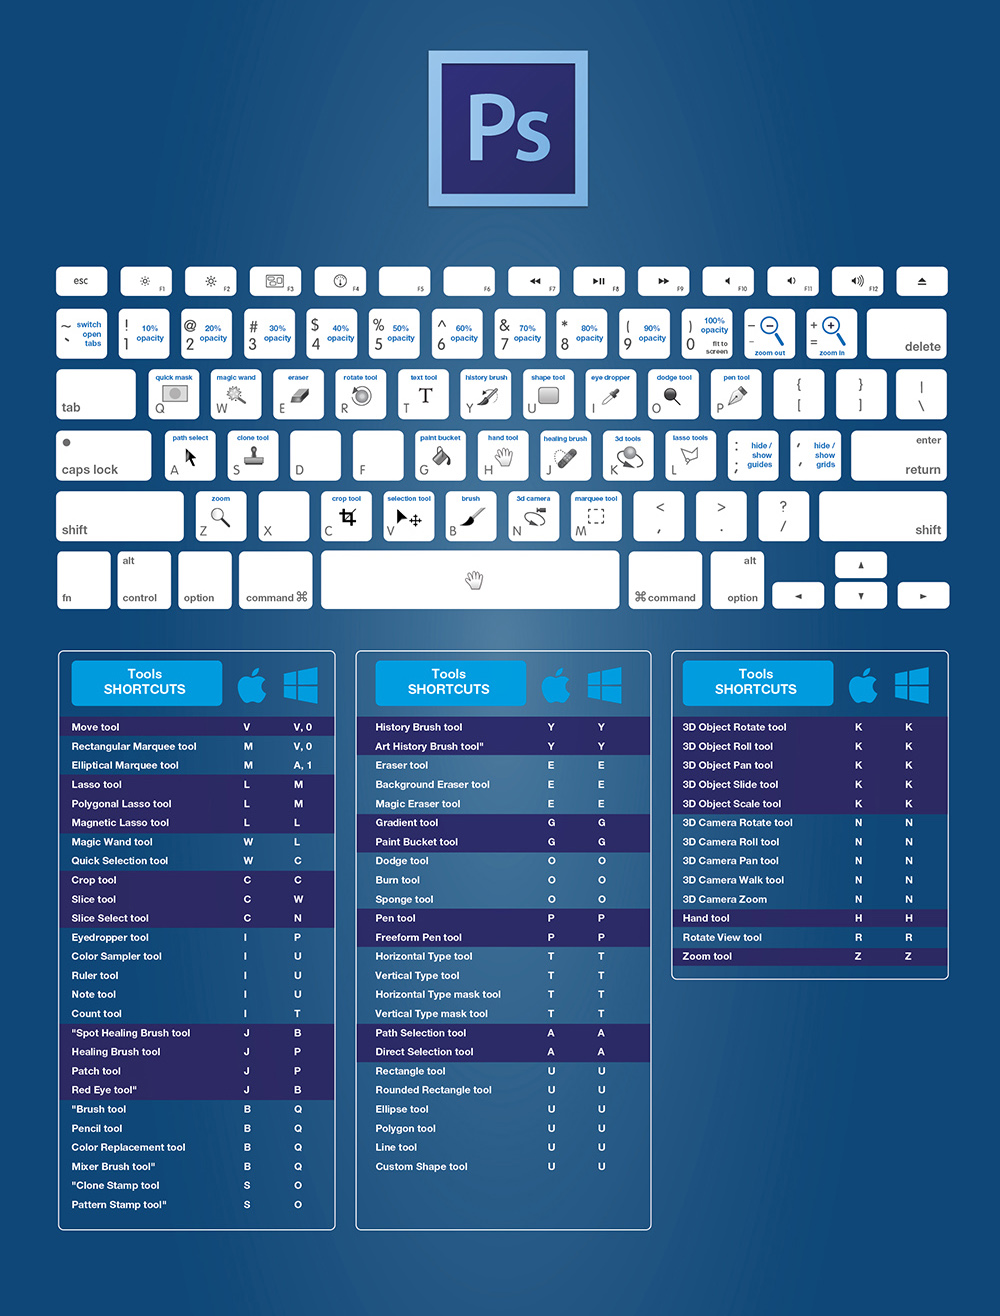 The Complete Adobe Photoshop CC Keyboard Shortcuts For Designers Guide 2015